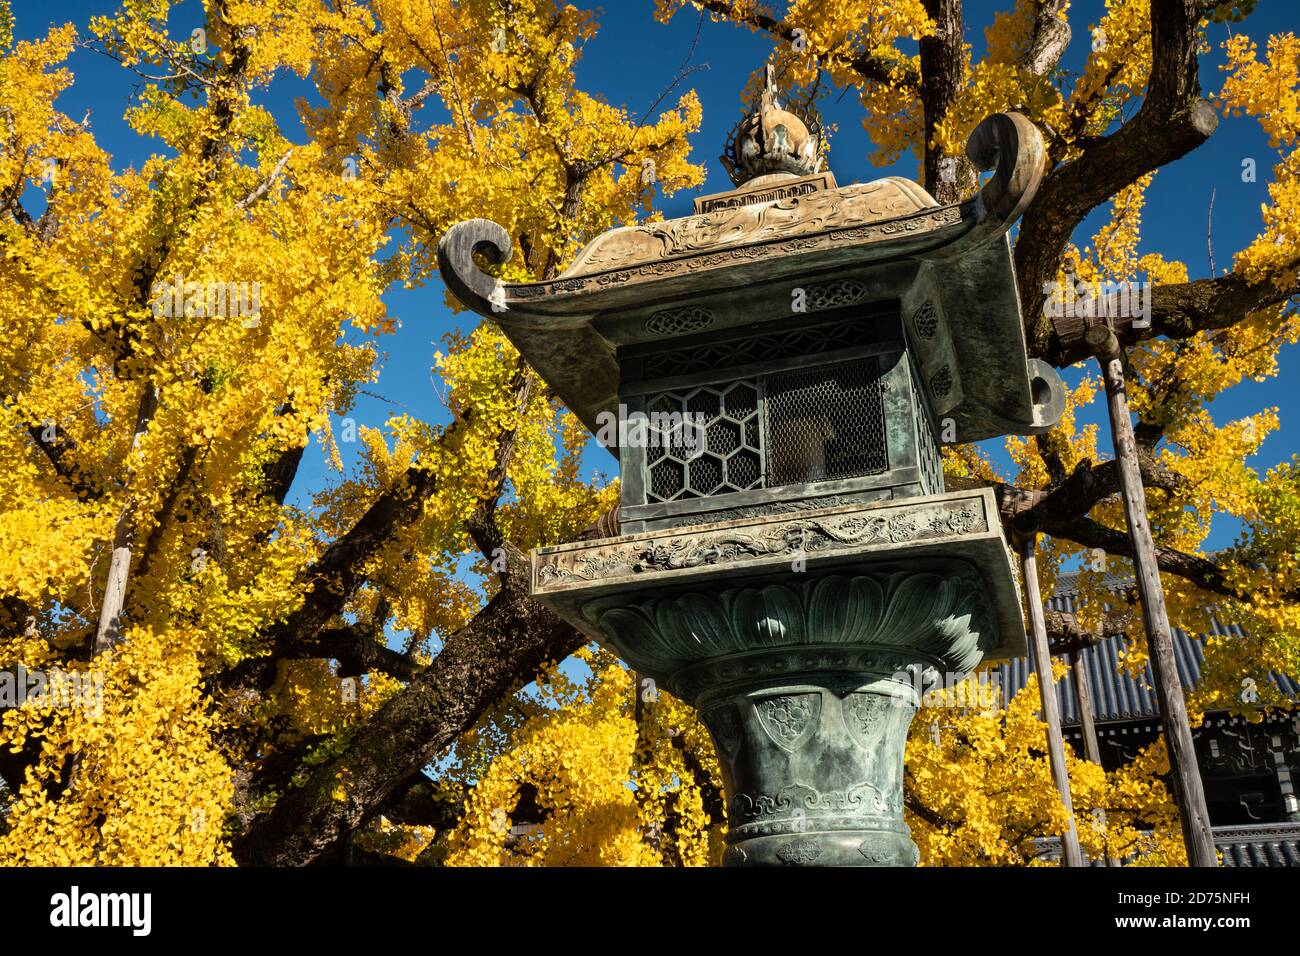 Stone lantern at Buddhist temple in Japan. Stunning yellow tree in background. Stock Photo